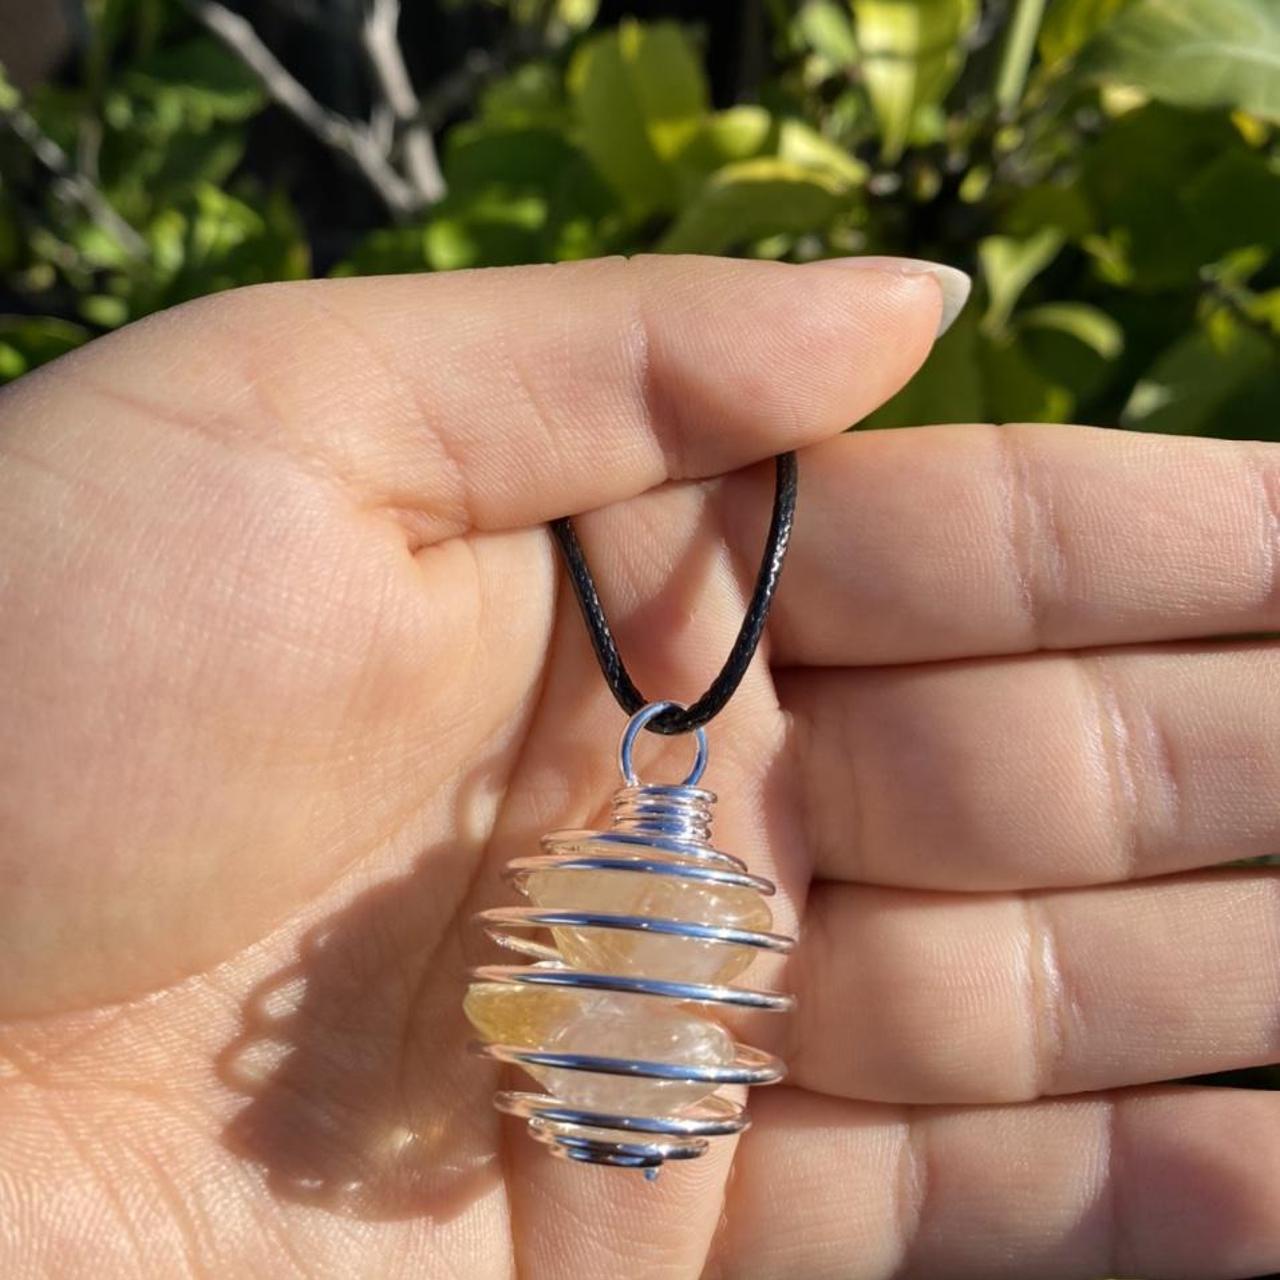 Citrine crystal cage necklace. Made with real